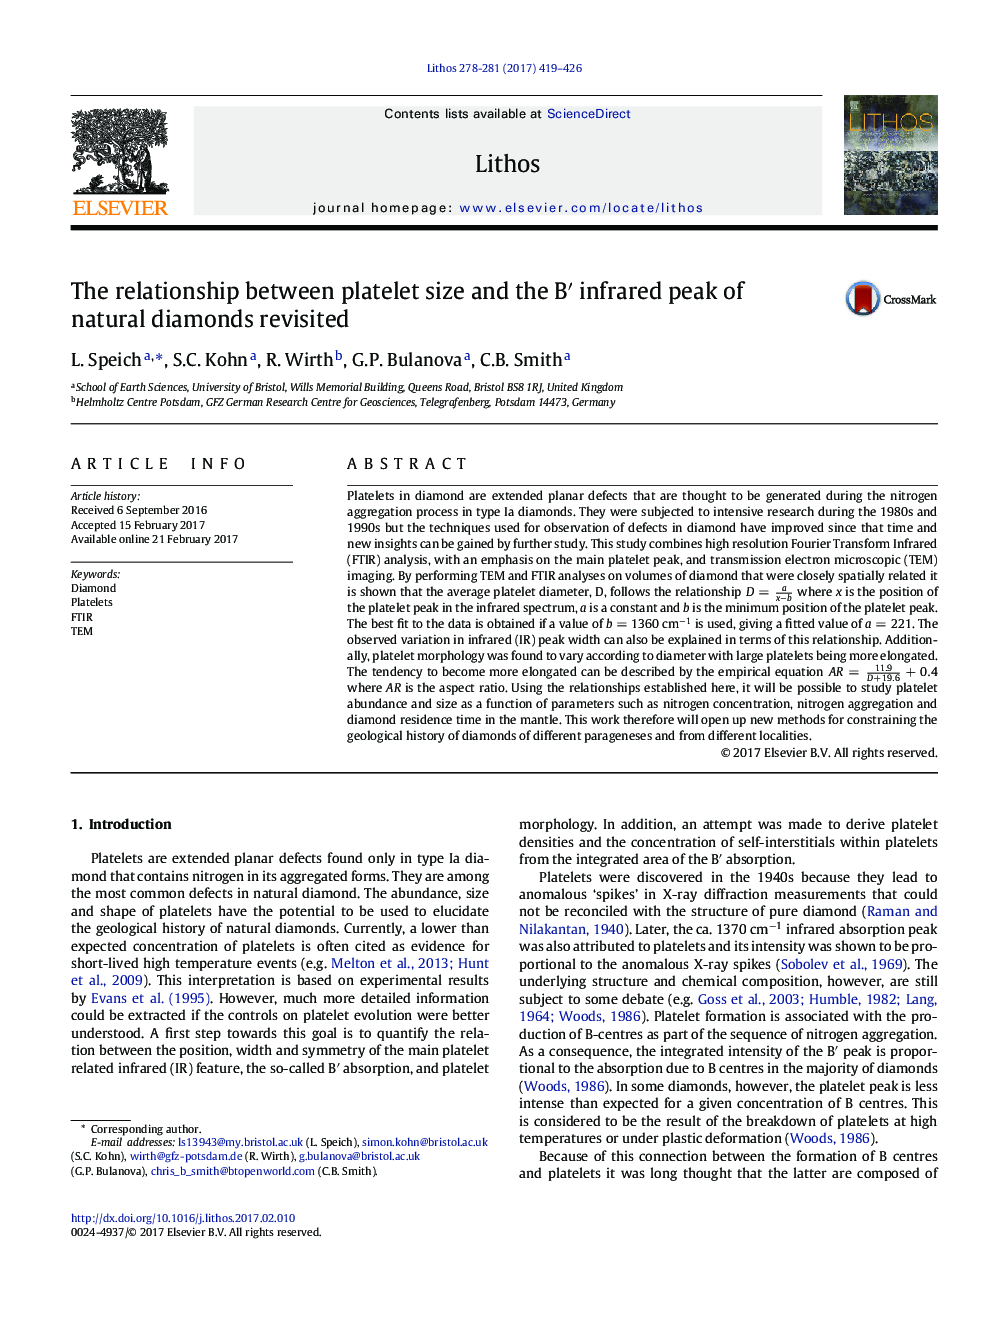 The relationship between platelet size and the Bâ² infrared peak of natural diamonds revisited